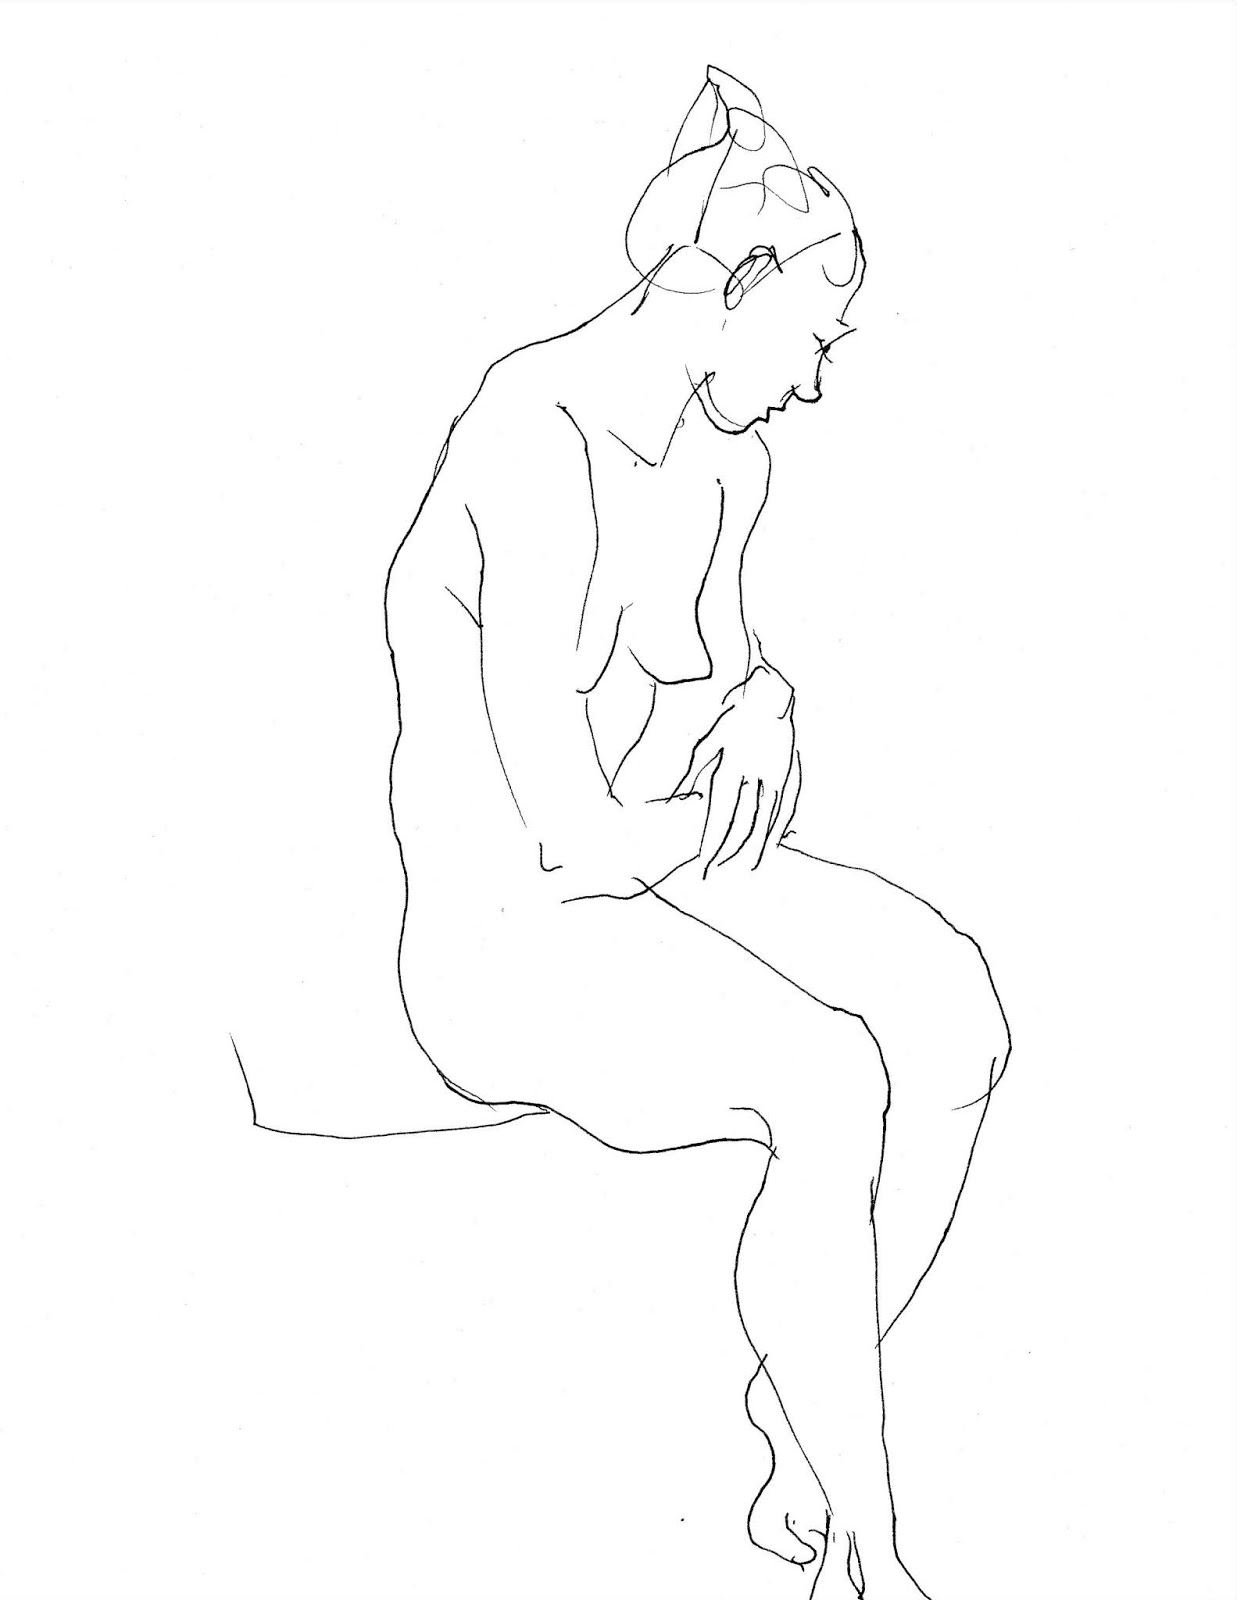 Pencil line drawing of a nude woman, seated